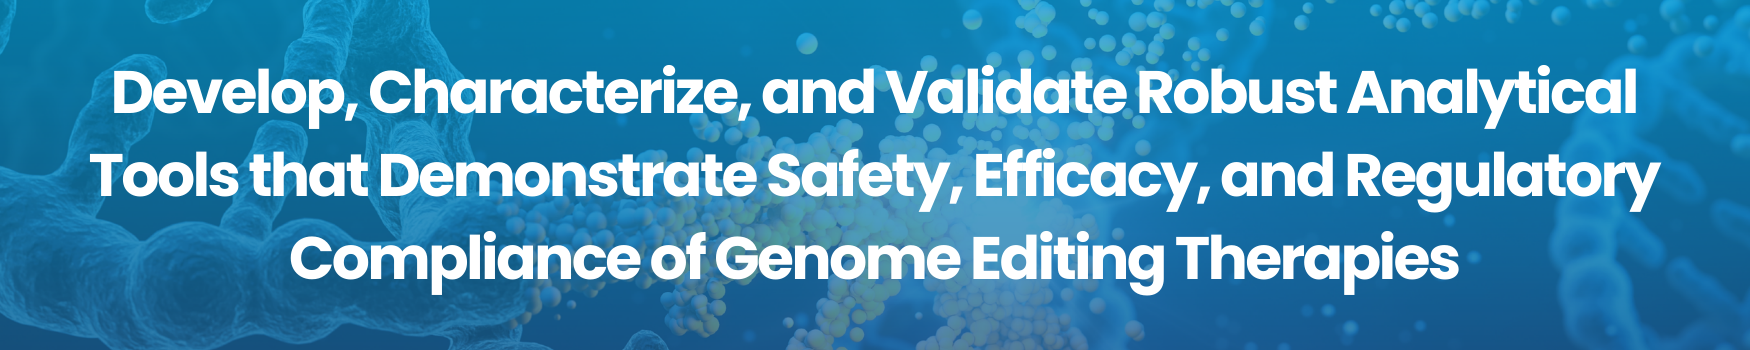 Develop, Characterize, and Validate Robust Analytical Tools that Demonstrate Safety, Efficacy, and Regulatory Compliance of Genome Editing Therapies